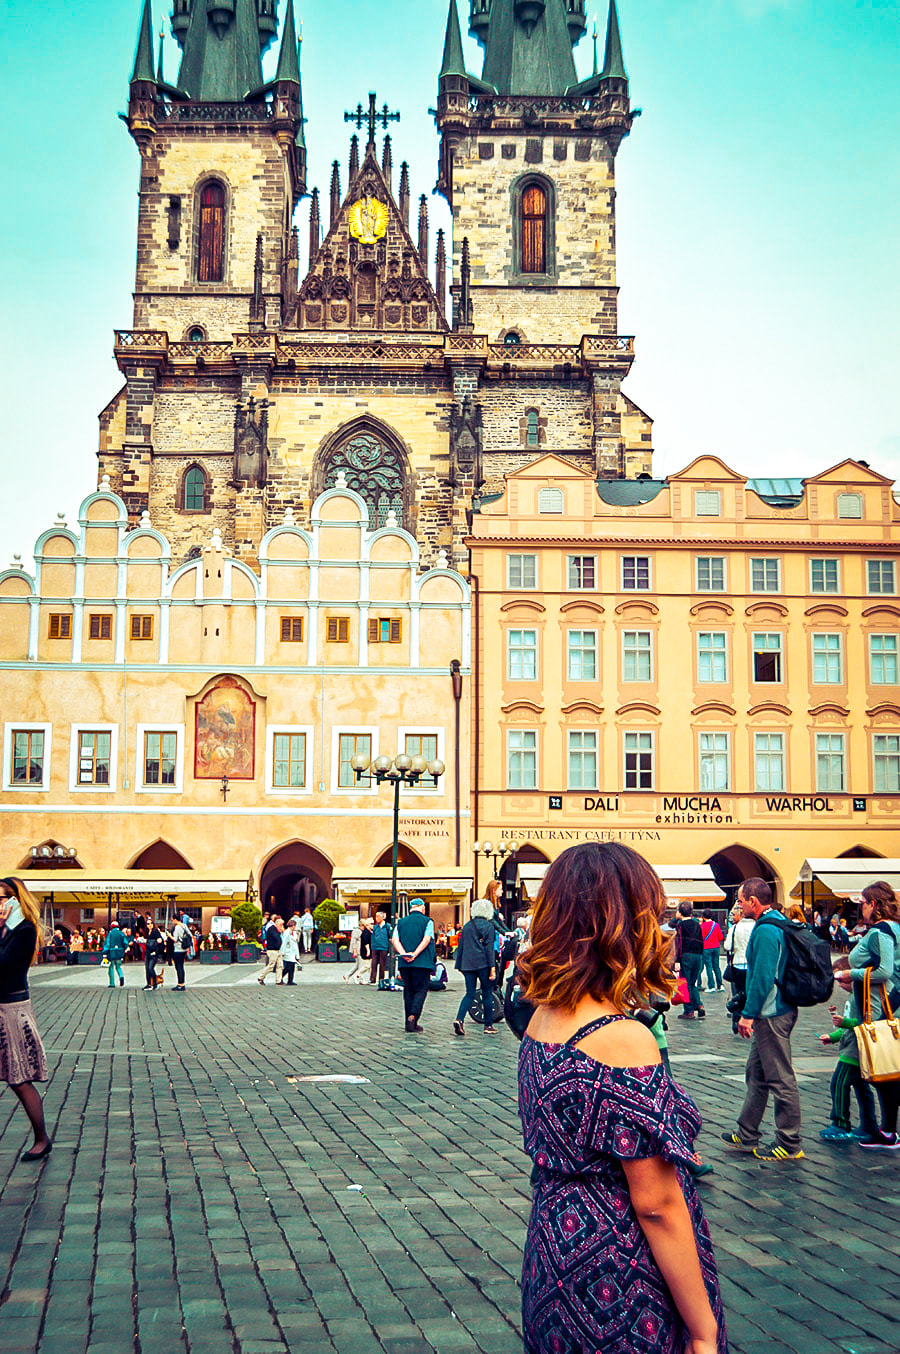 A woman enjoys the atmosphere and European architecture